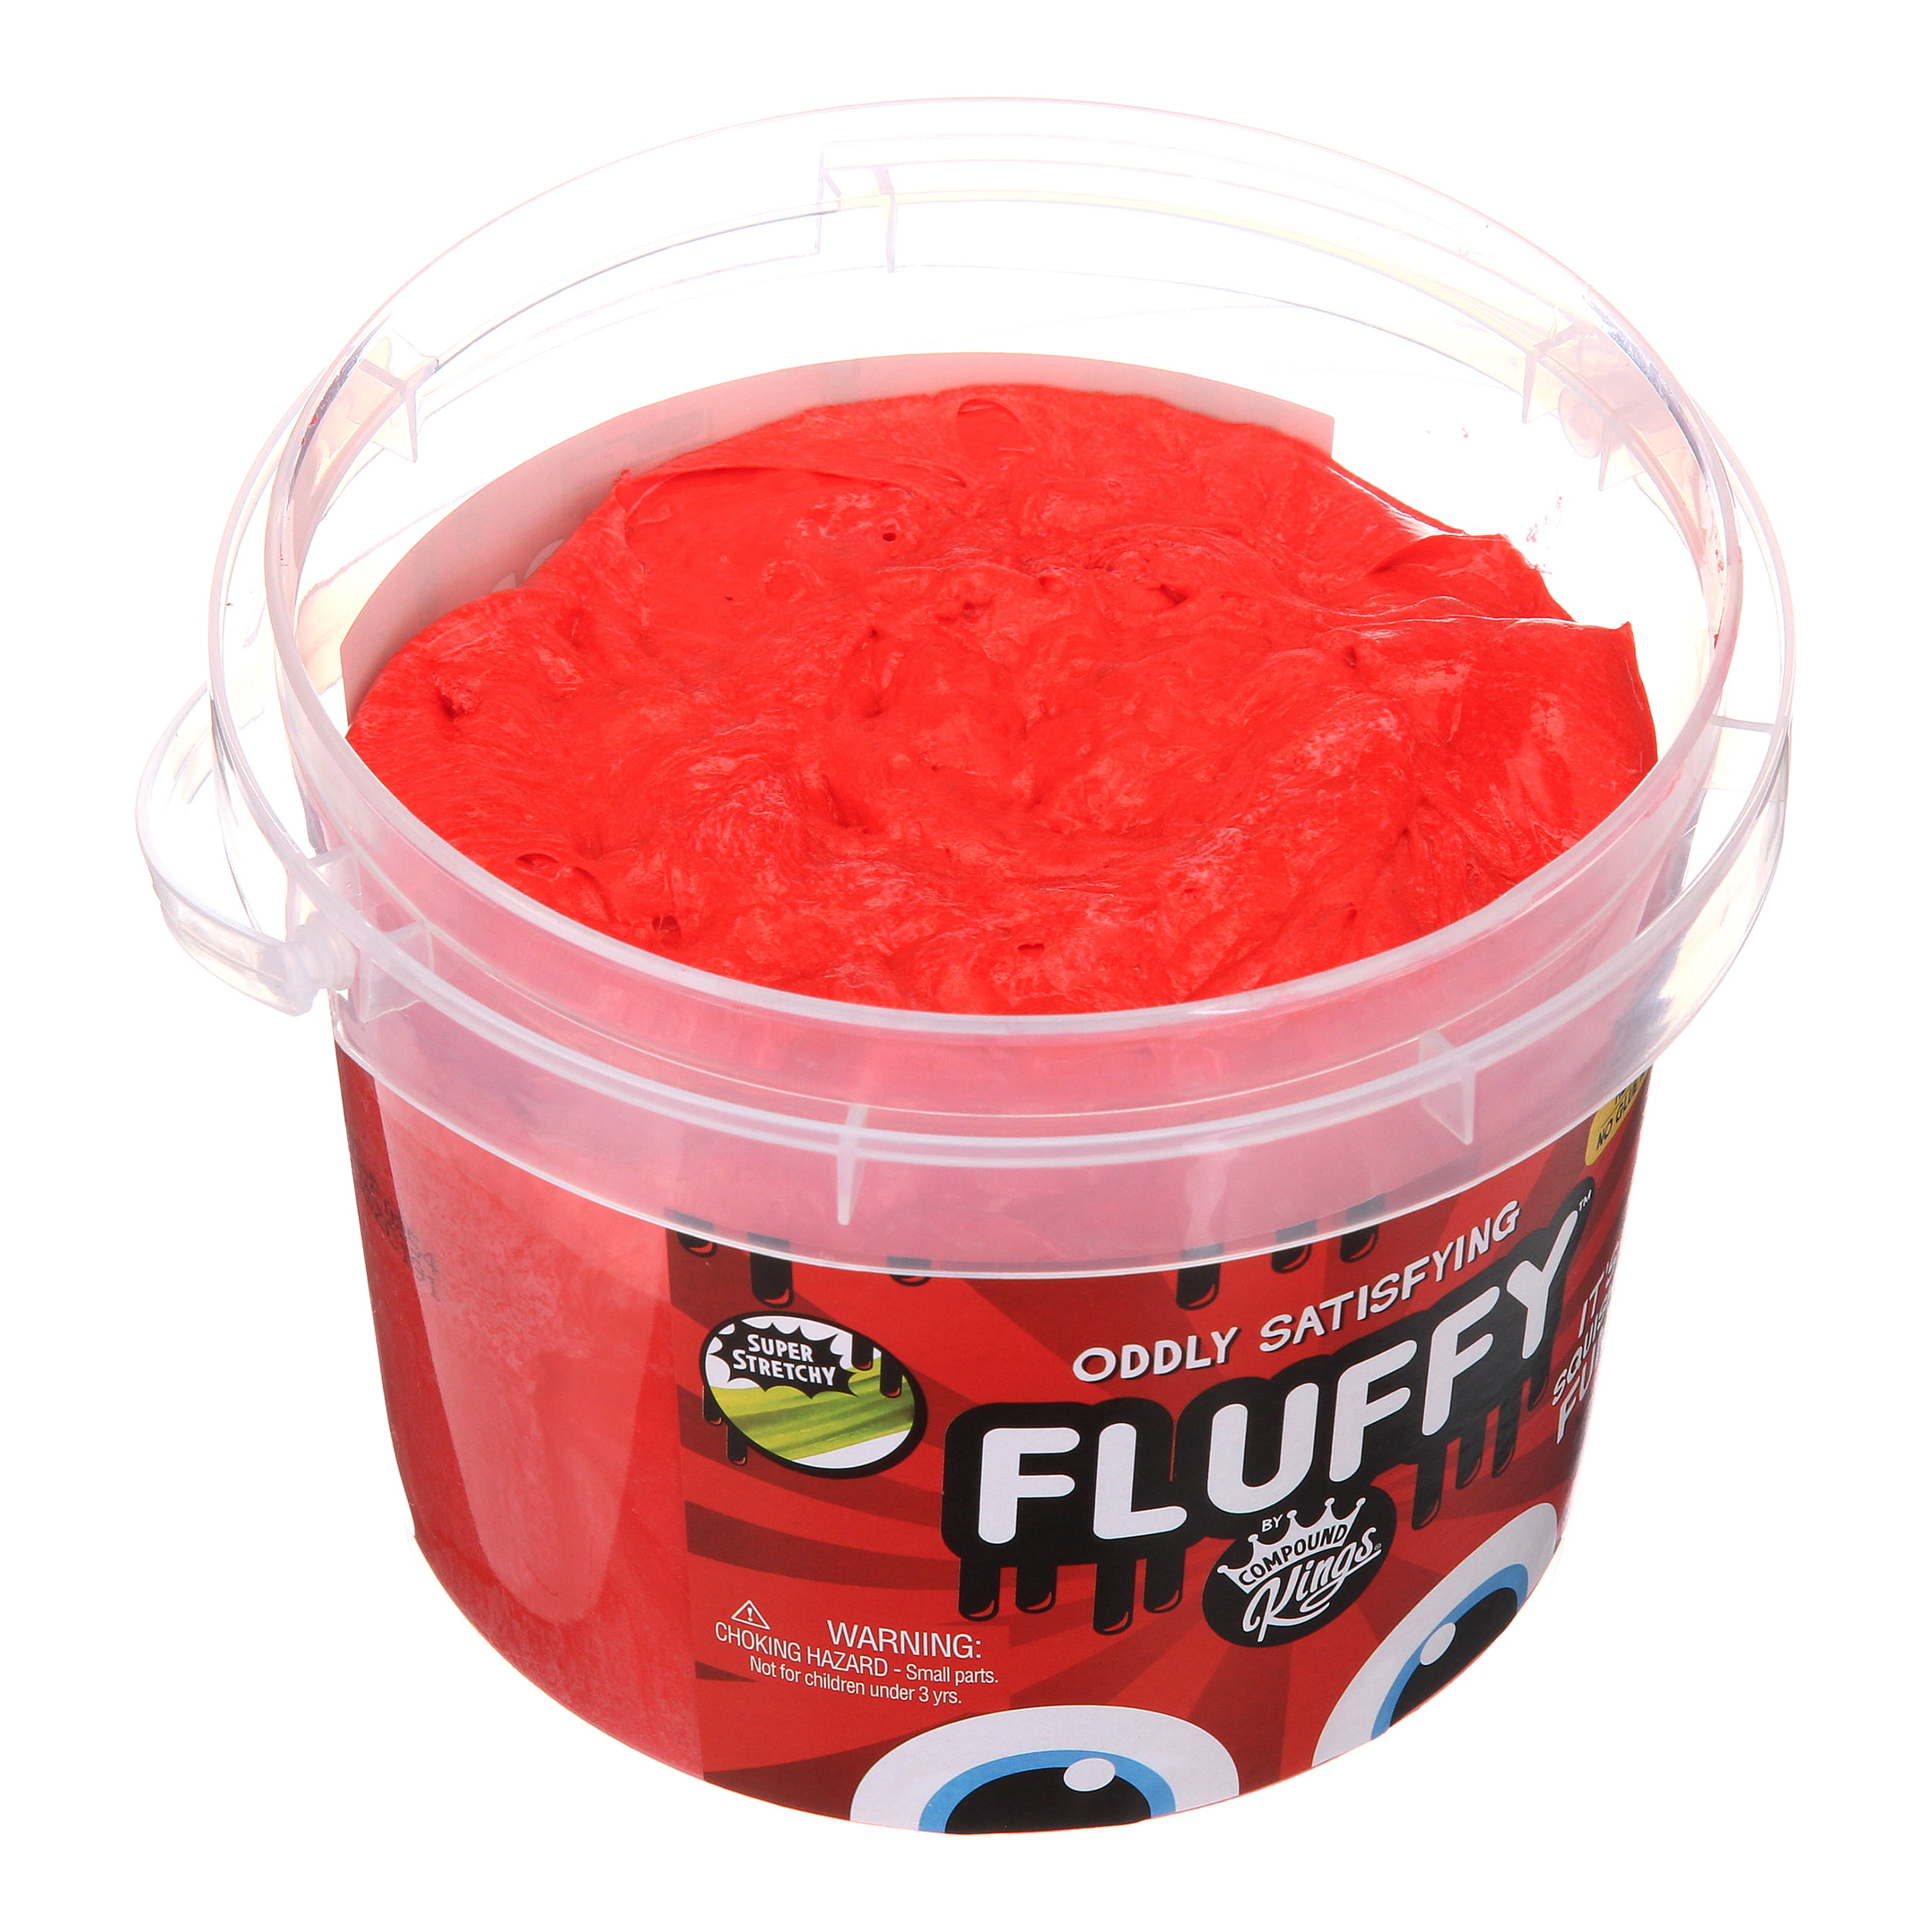 NEW Compound Kings FLUFFY Super Stretchy Slime Red w/ Glitter 3 lb Bucket 